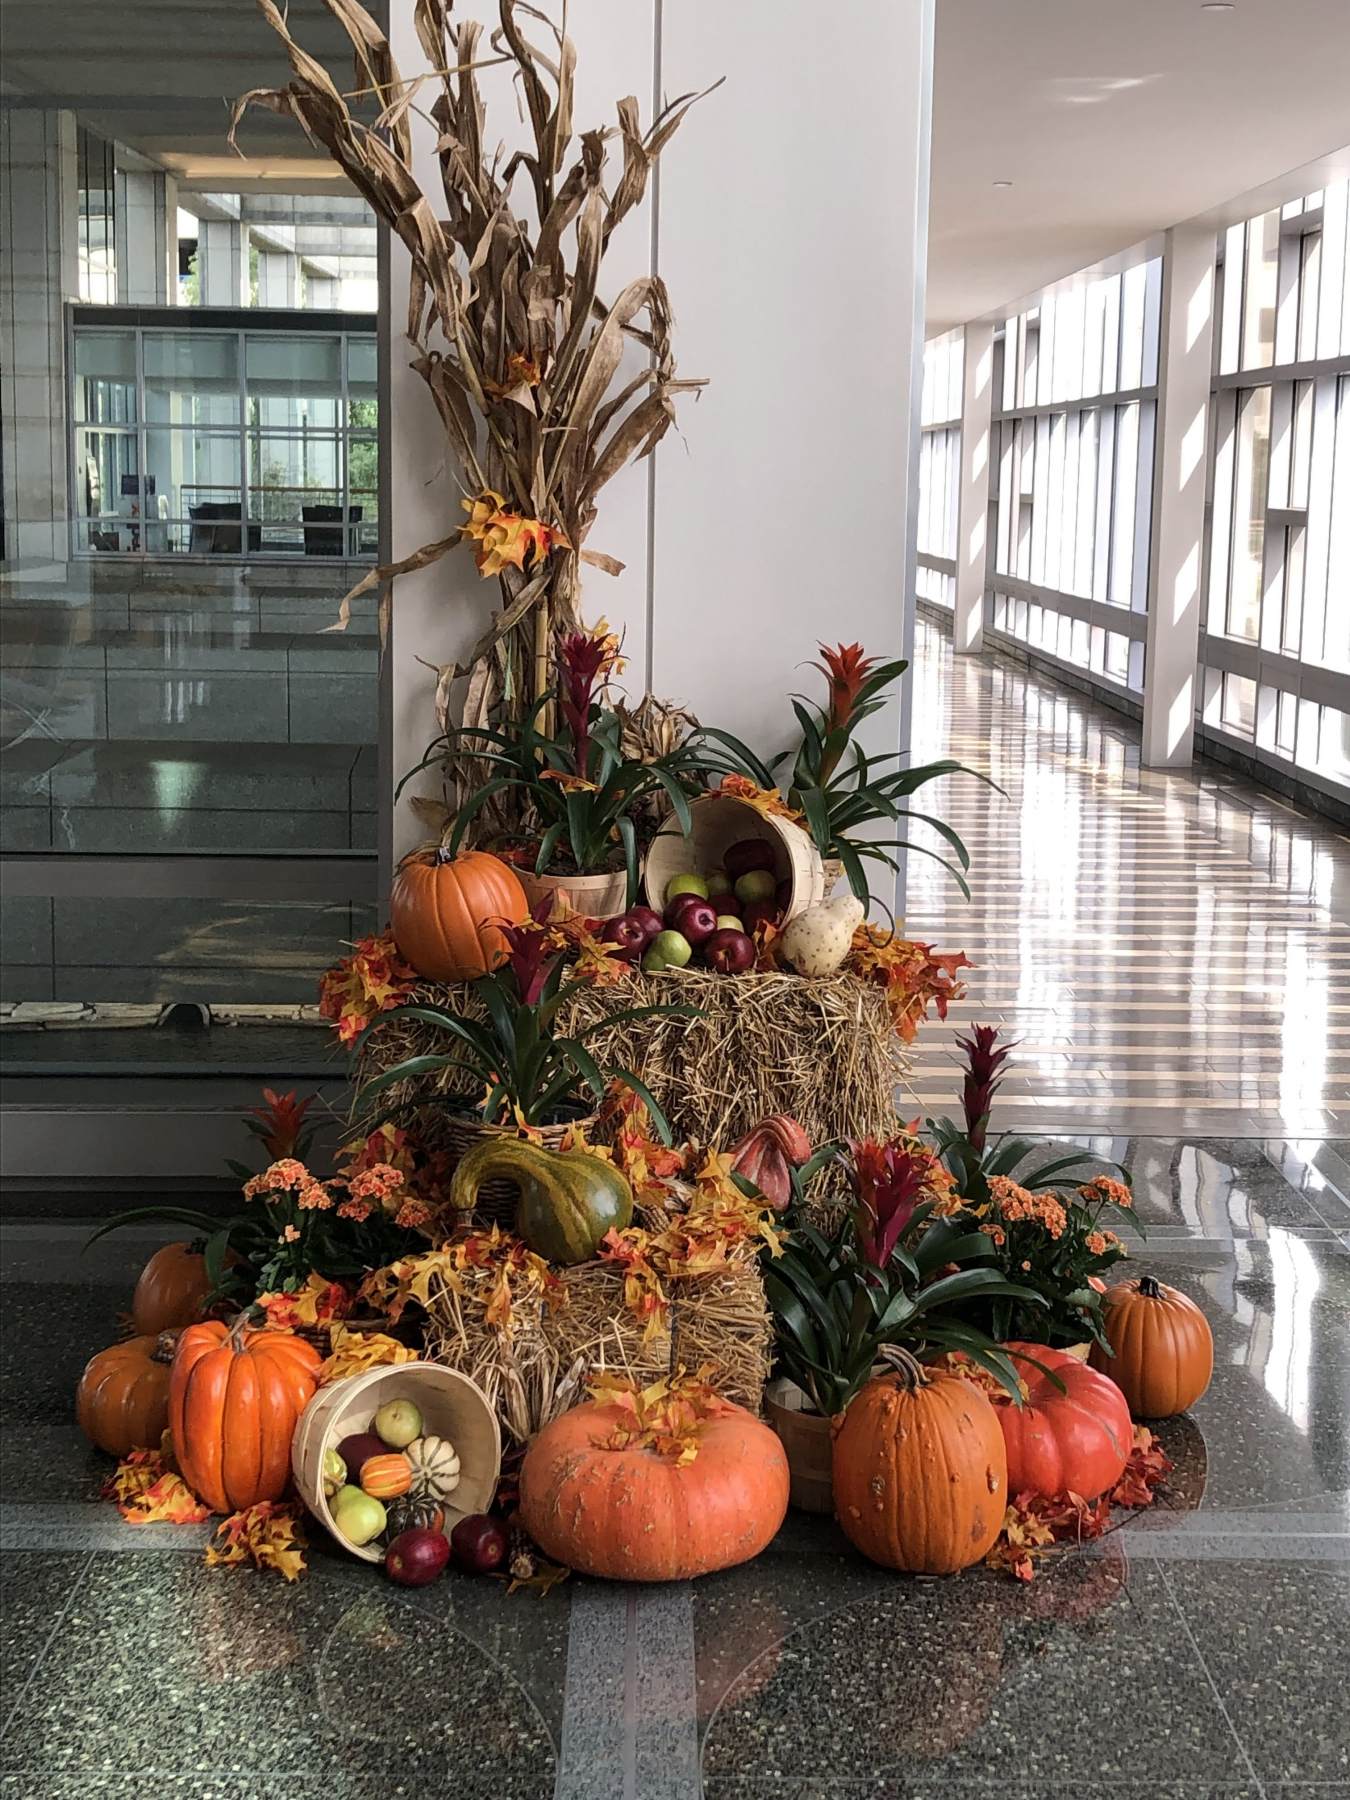 Fall Decor For the Home or Office - How To Make the Most of the Changing Season